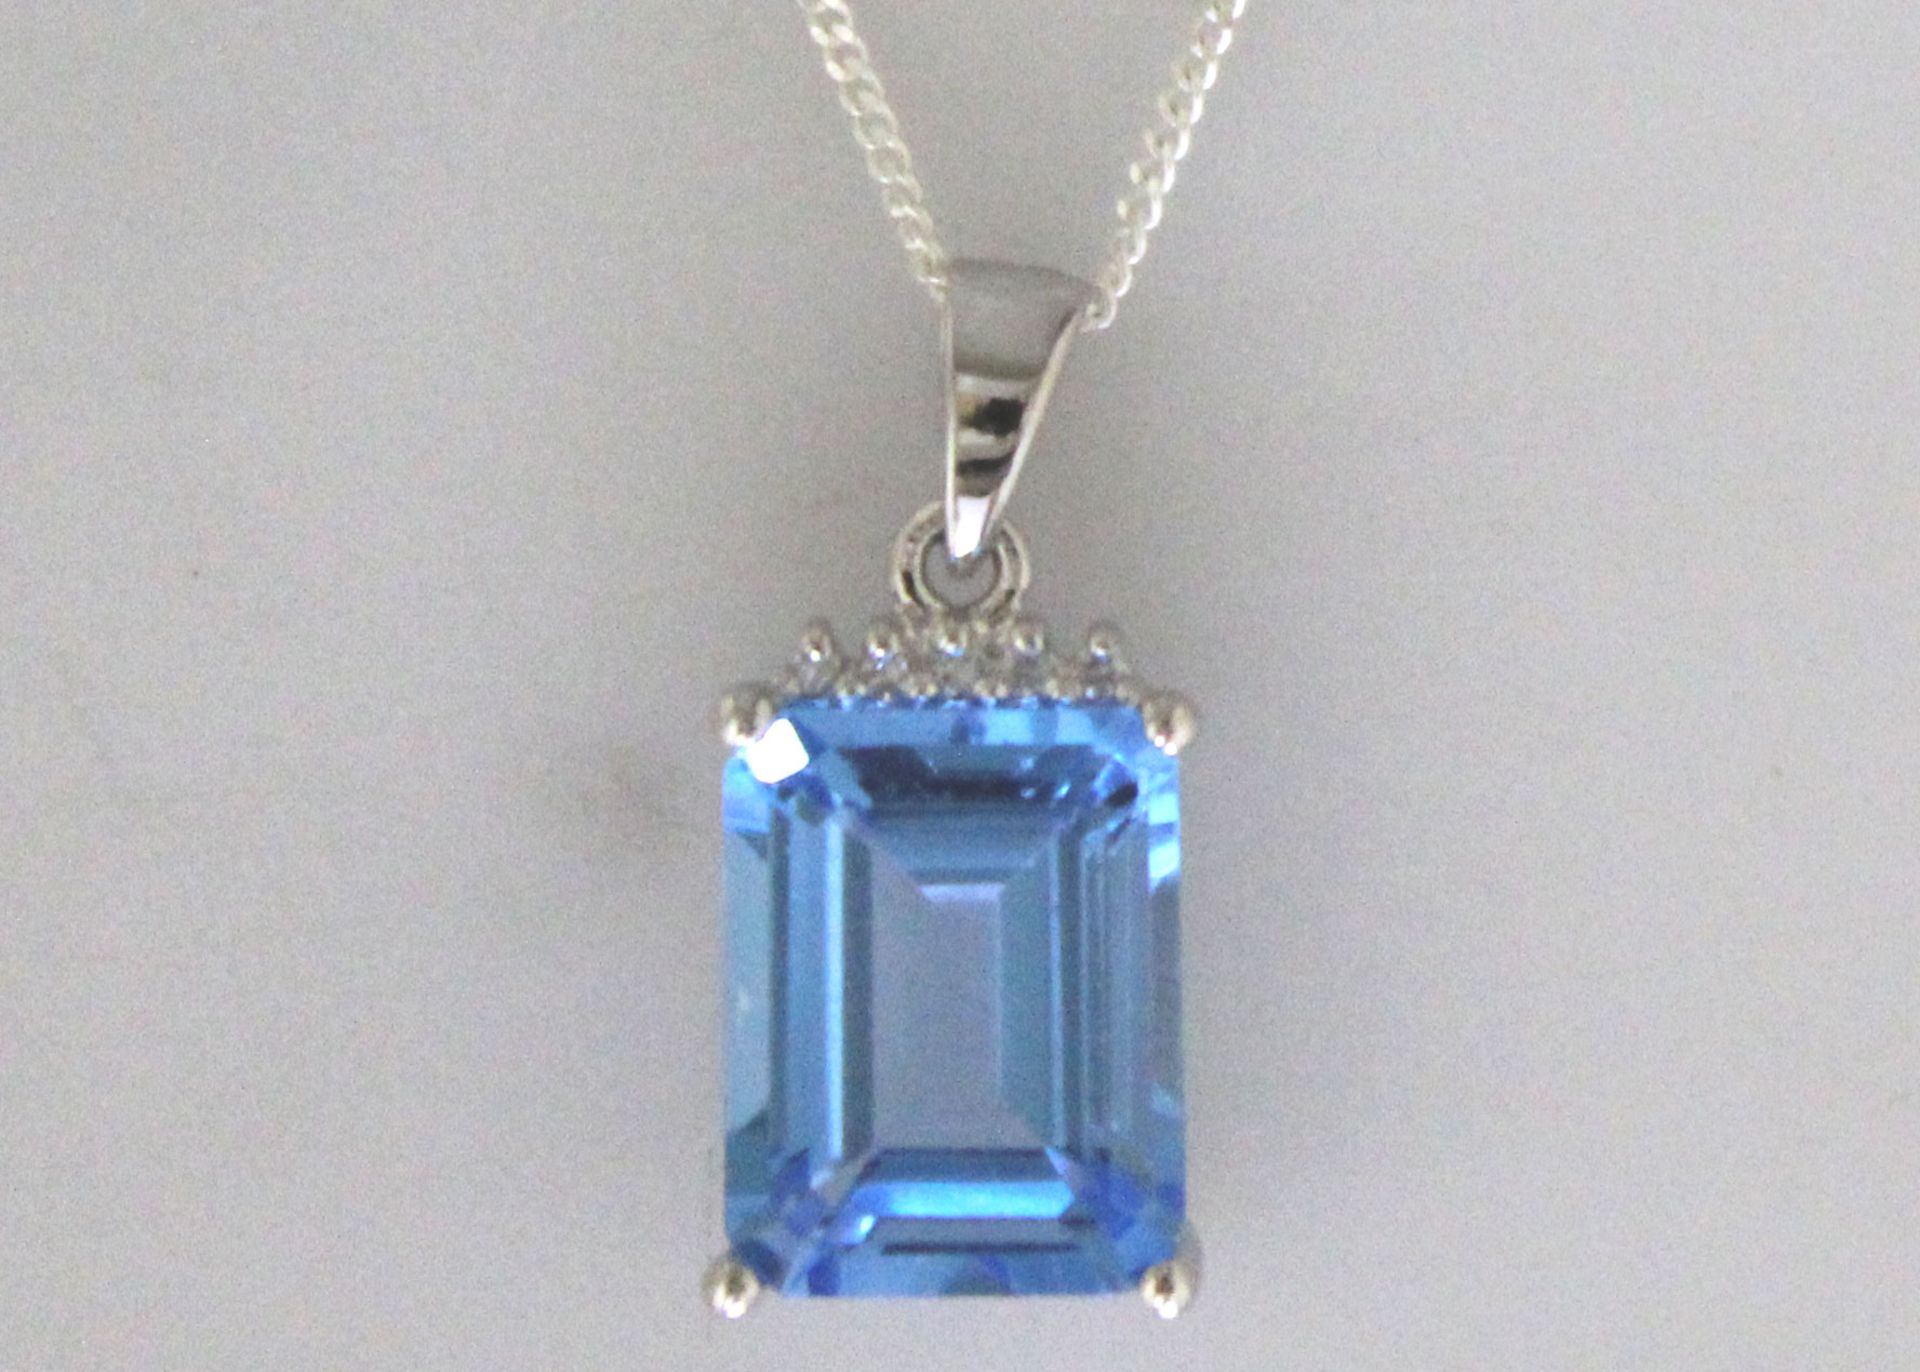 9ct White Gold Diamond And Blue Topaz Pendant 0.01 Carats - Valued by GIE £899.00 - 9ct White Gold - Image 2 of 6